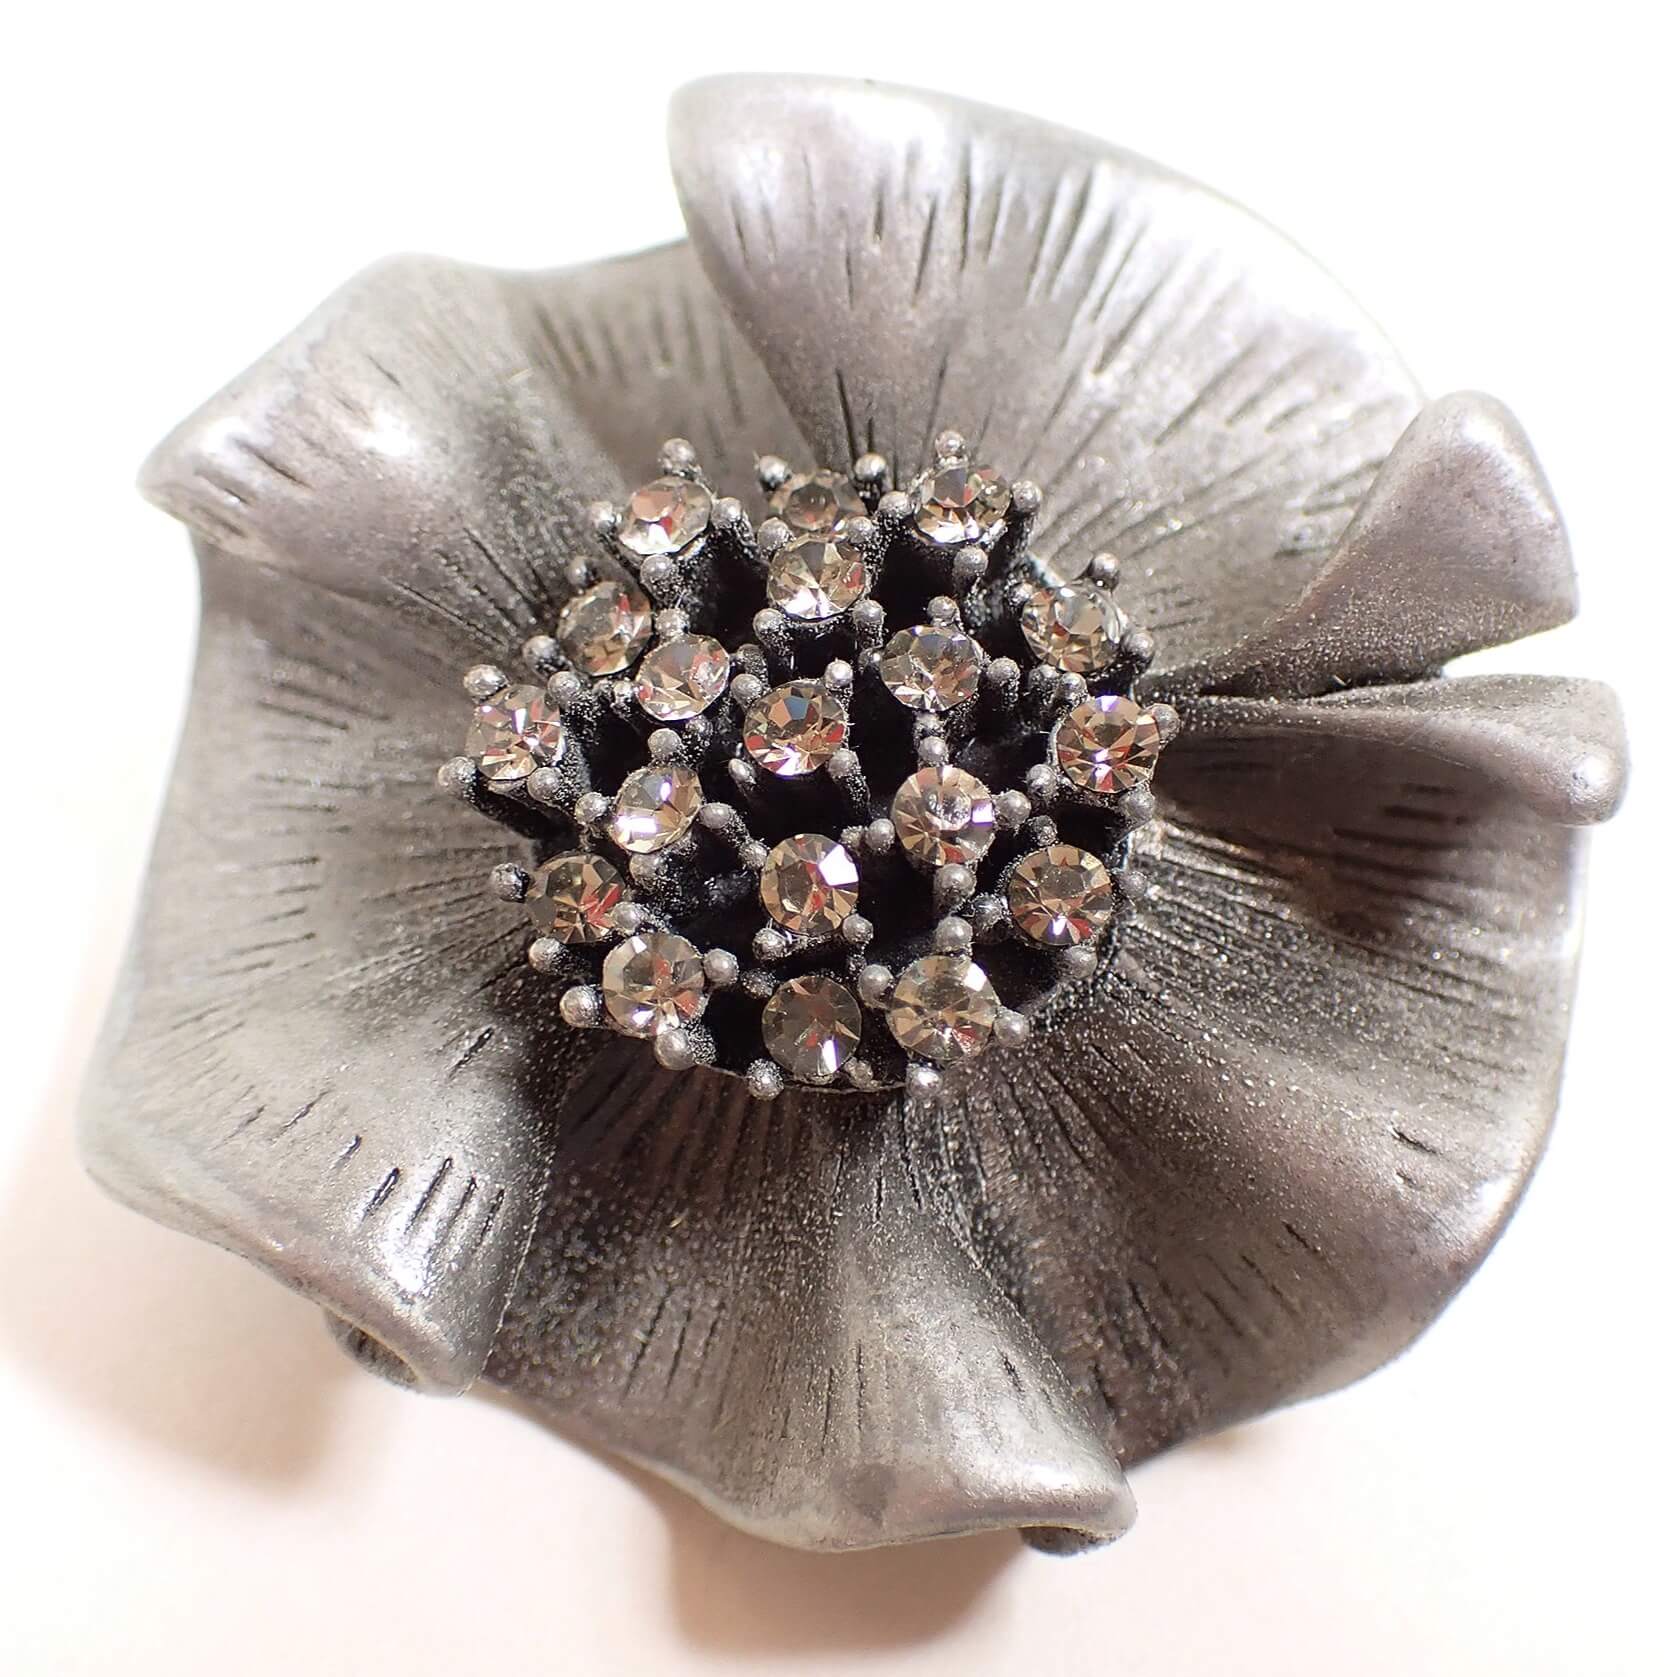 Front view of the retro vintage pewter brooch pendant. It is made of pewter in a medium gray color and is shaped like a rounded ruffle like flower. The middle part of the flower has clear round glass crystal rhinestones. 